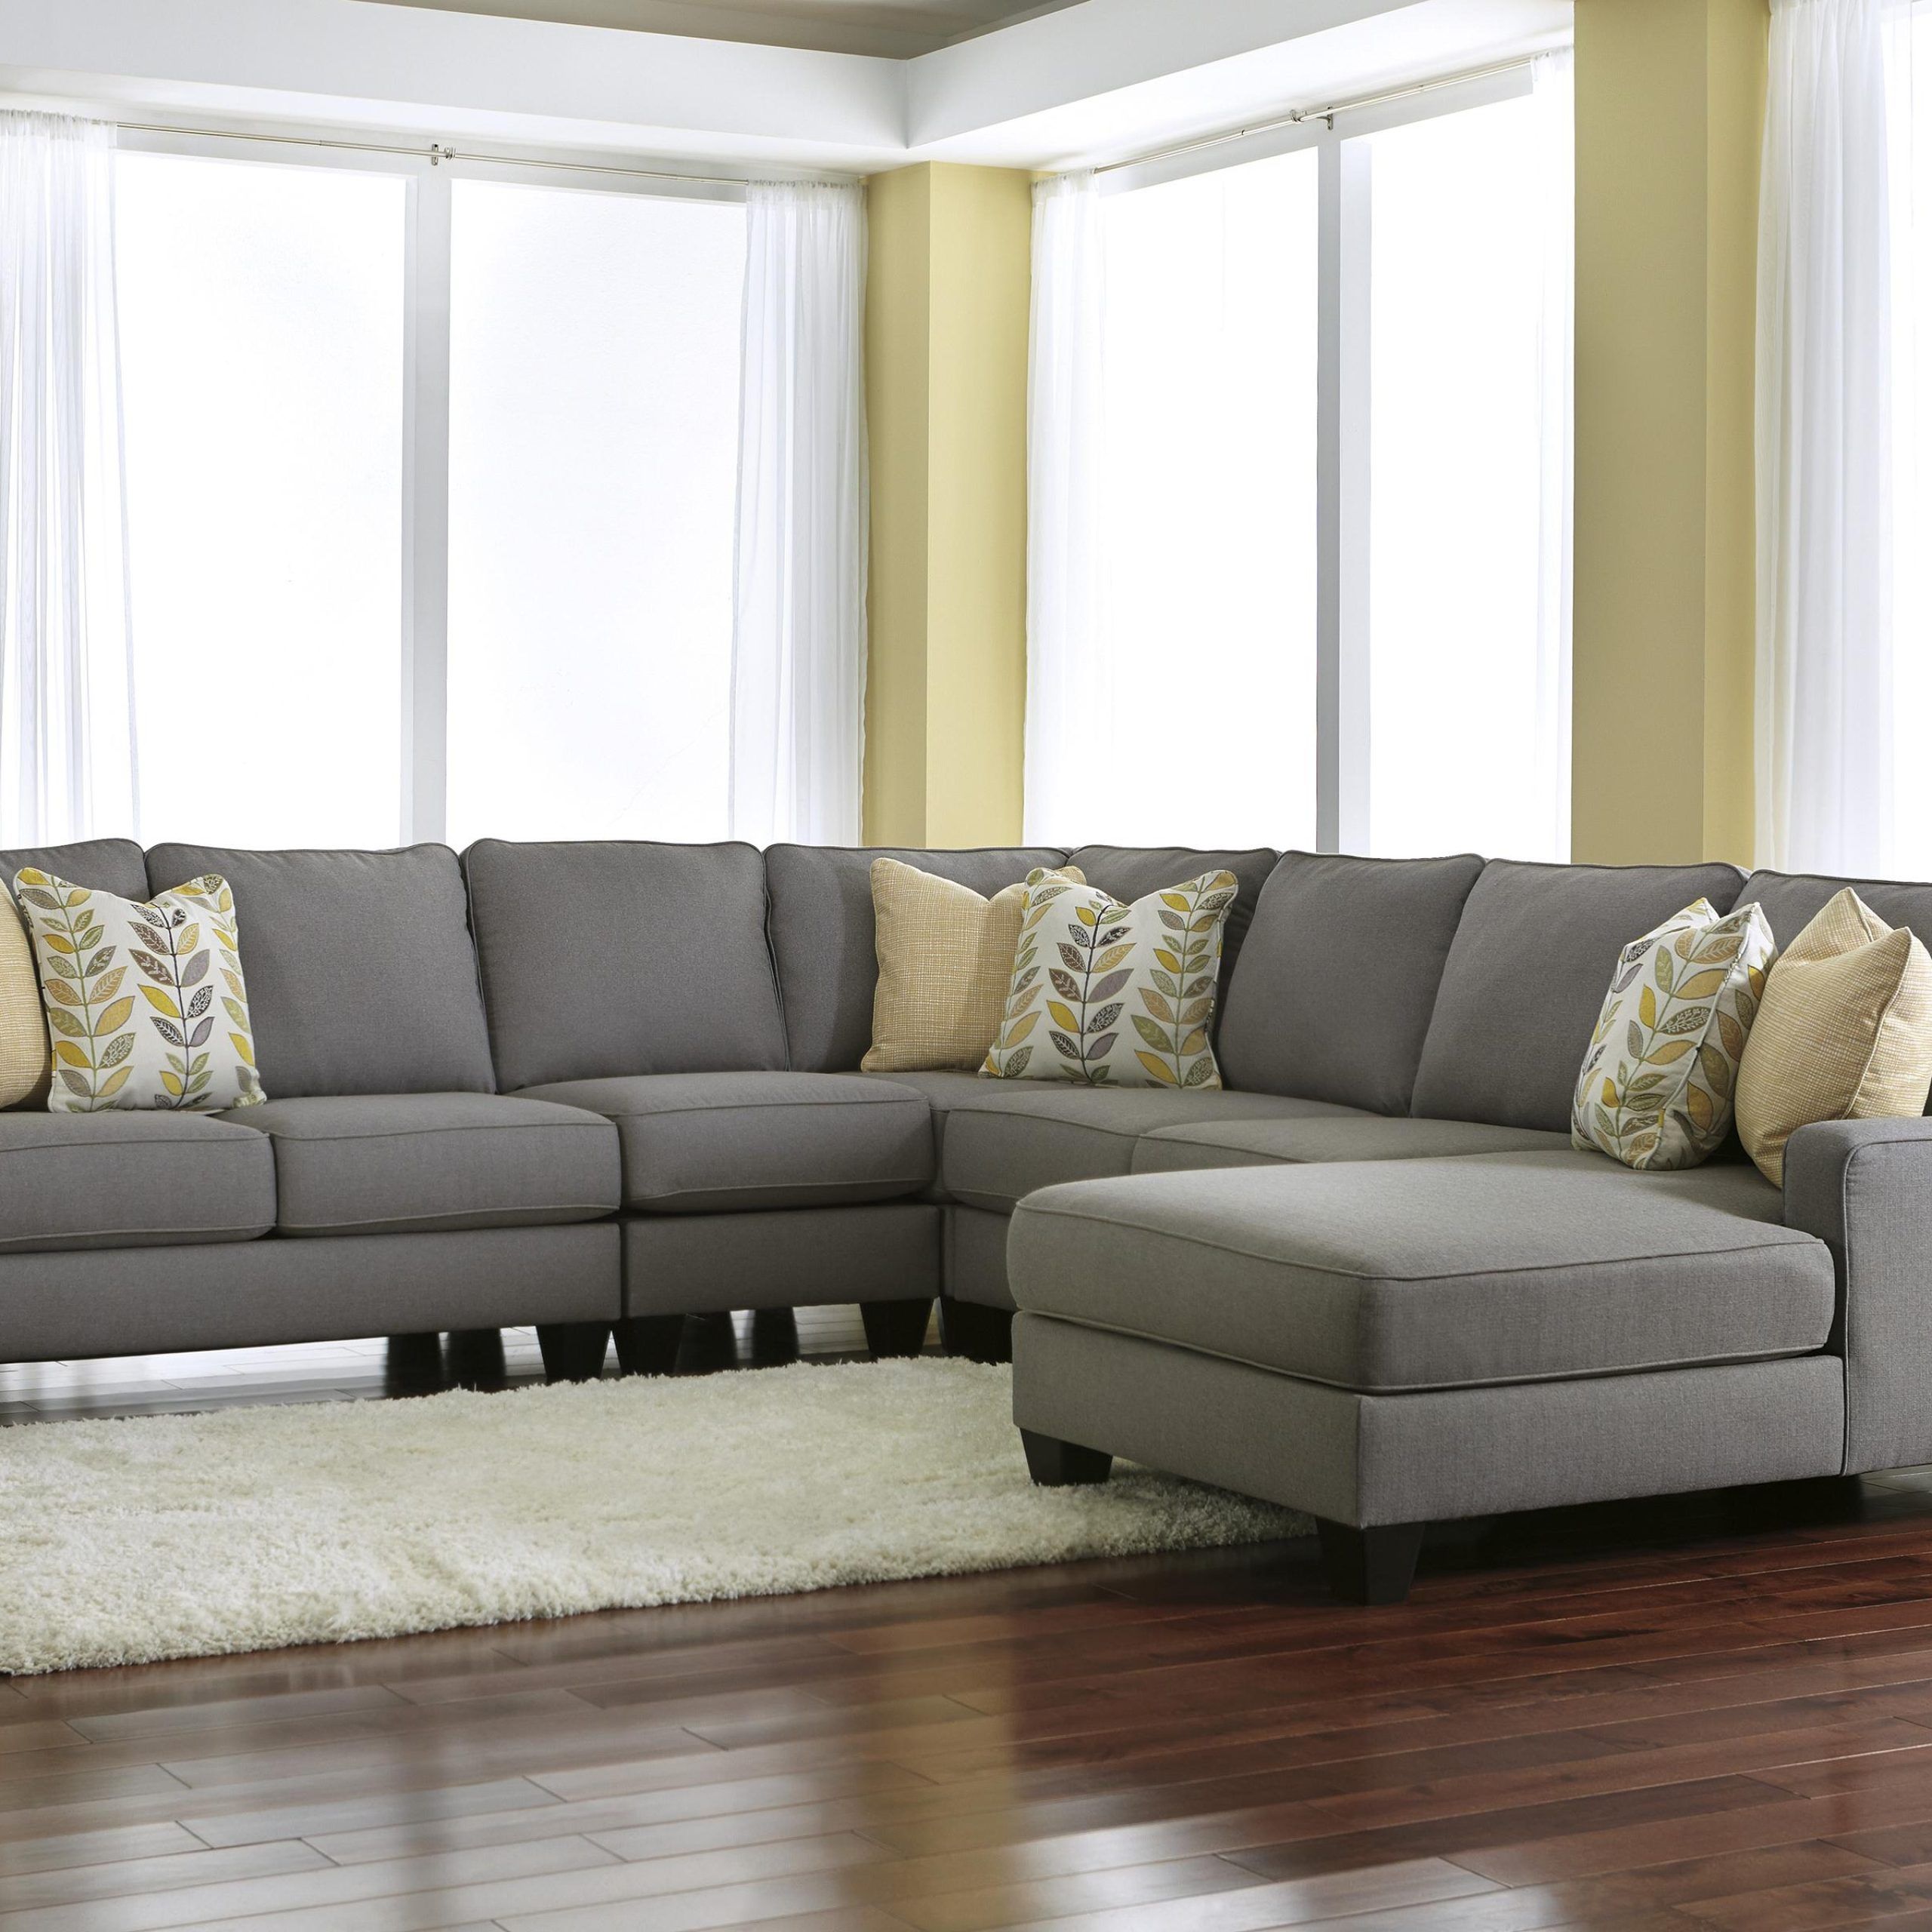 Most Current Reversible Sectional Sofas Inside Signature Designashley Chamberly – Alloy Modern 5 Piece Sectional (View 2 of 15)